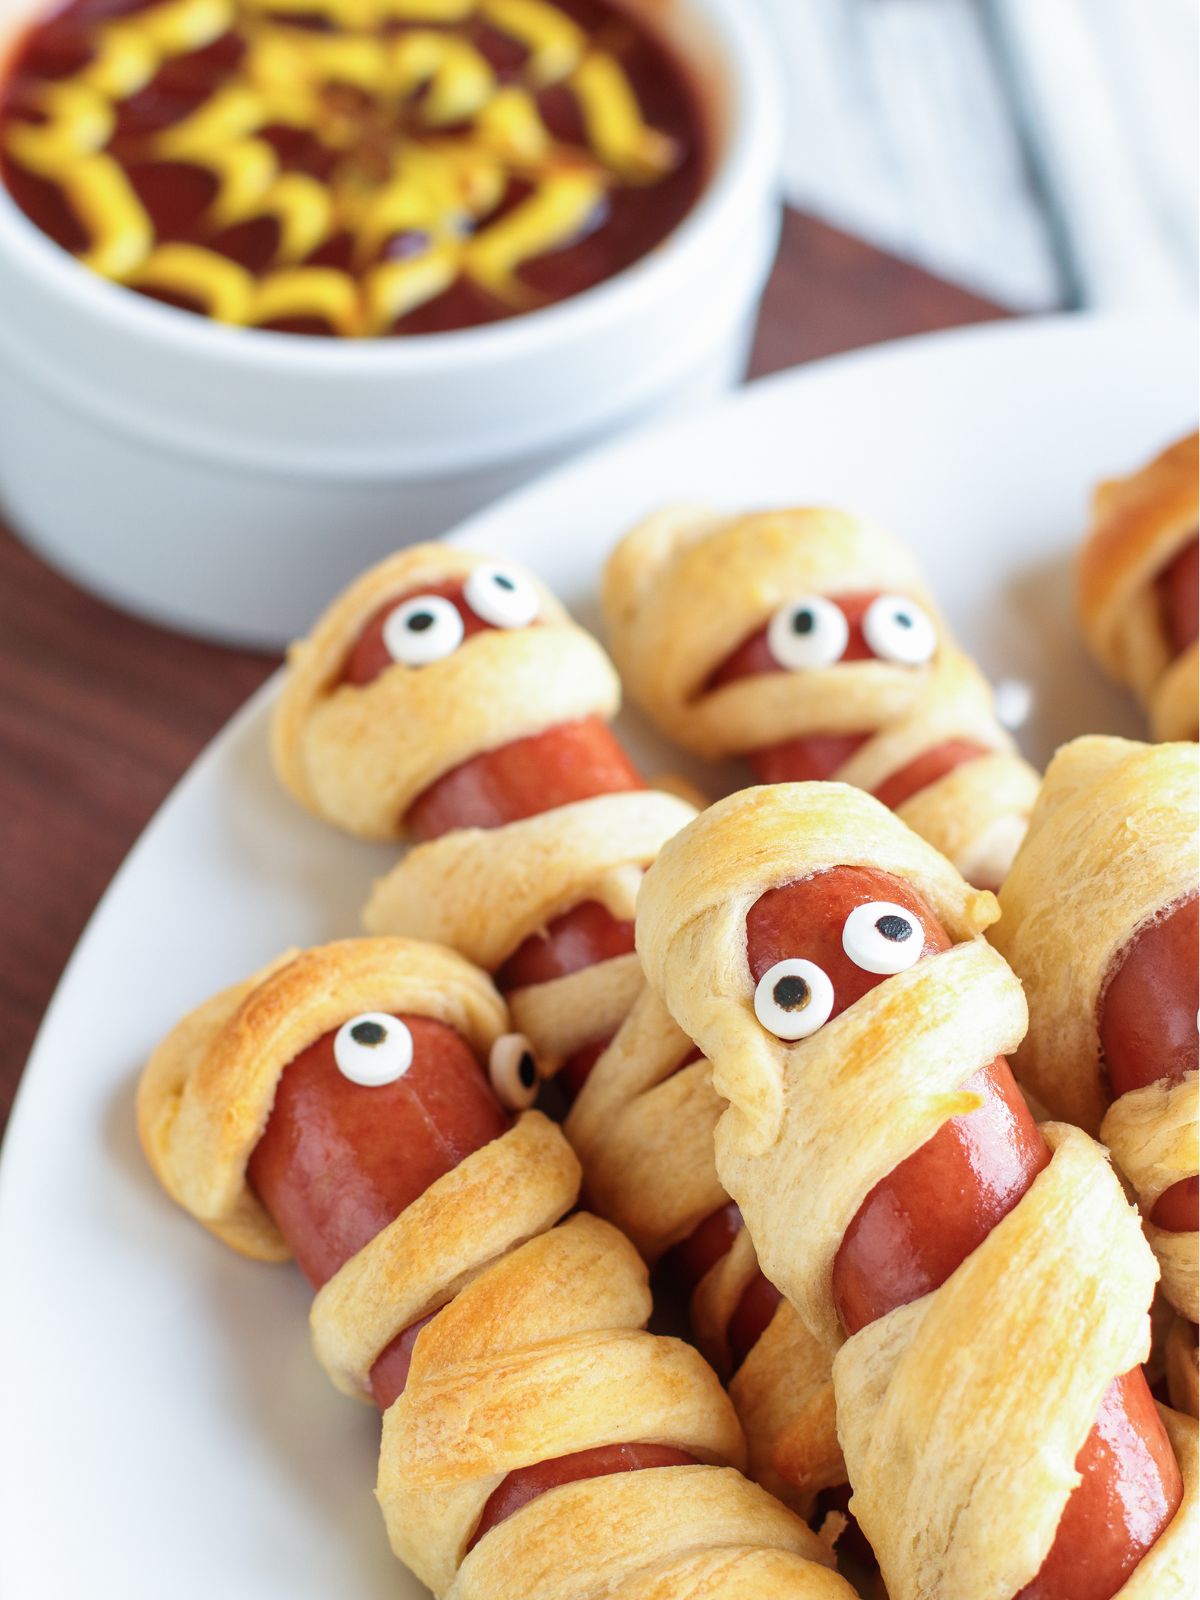 Hot dogs wrapped in crescent roll dough to look like mummies.